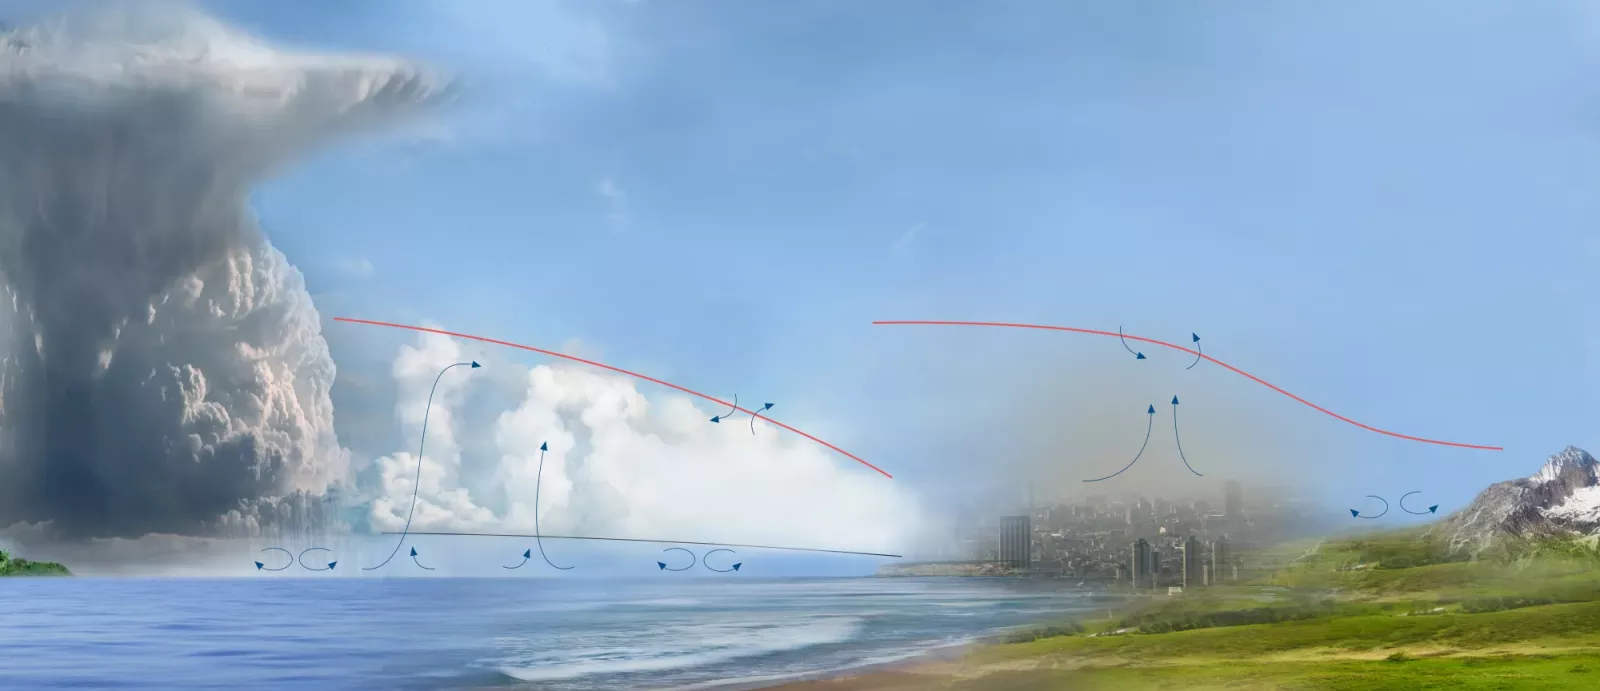 an illustration showing the ocean, leading to shore and a city, and clouds. Red lines in the sky indicate the planetary boundary layer